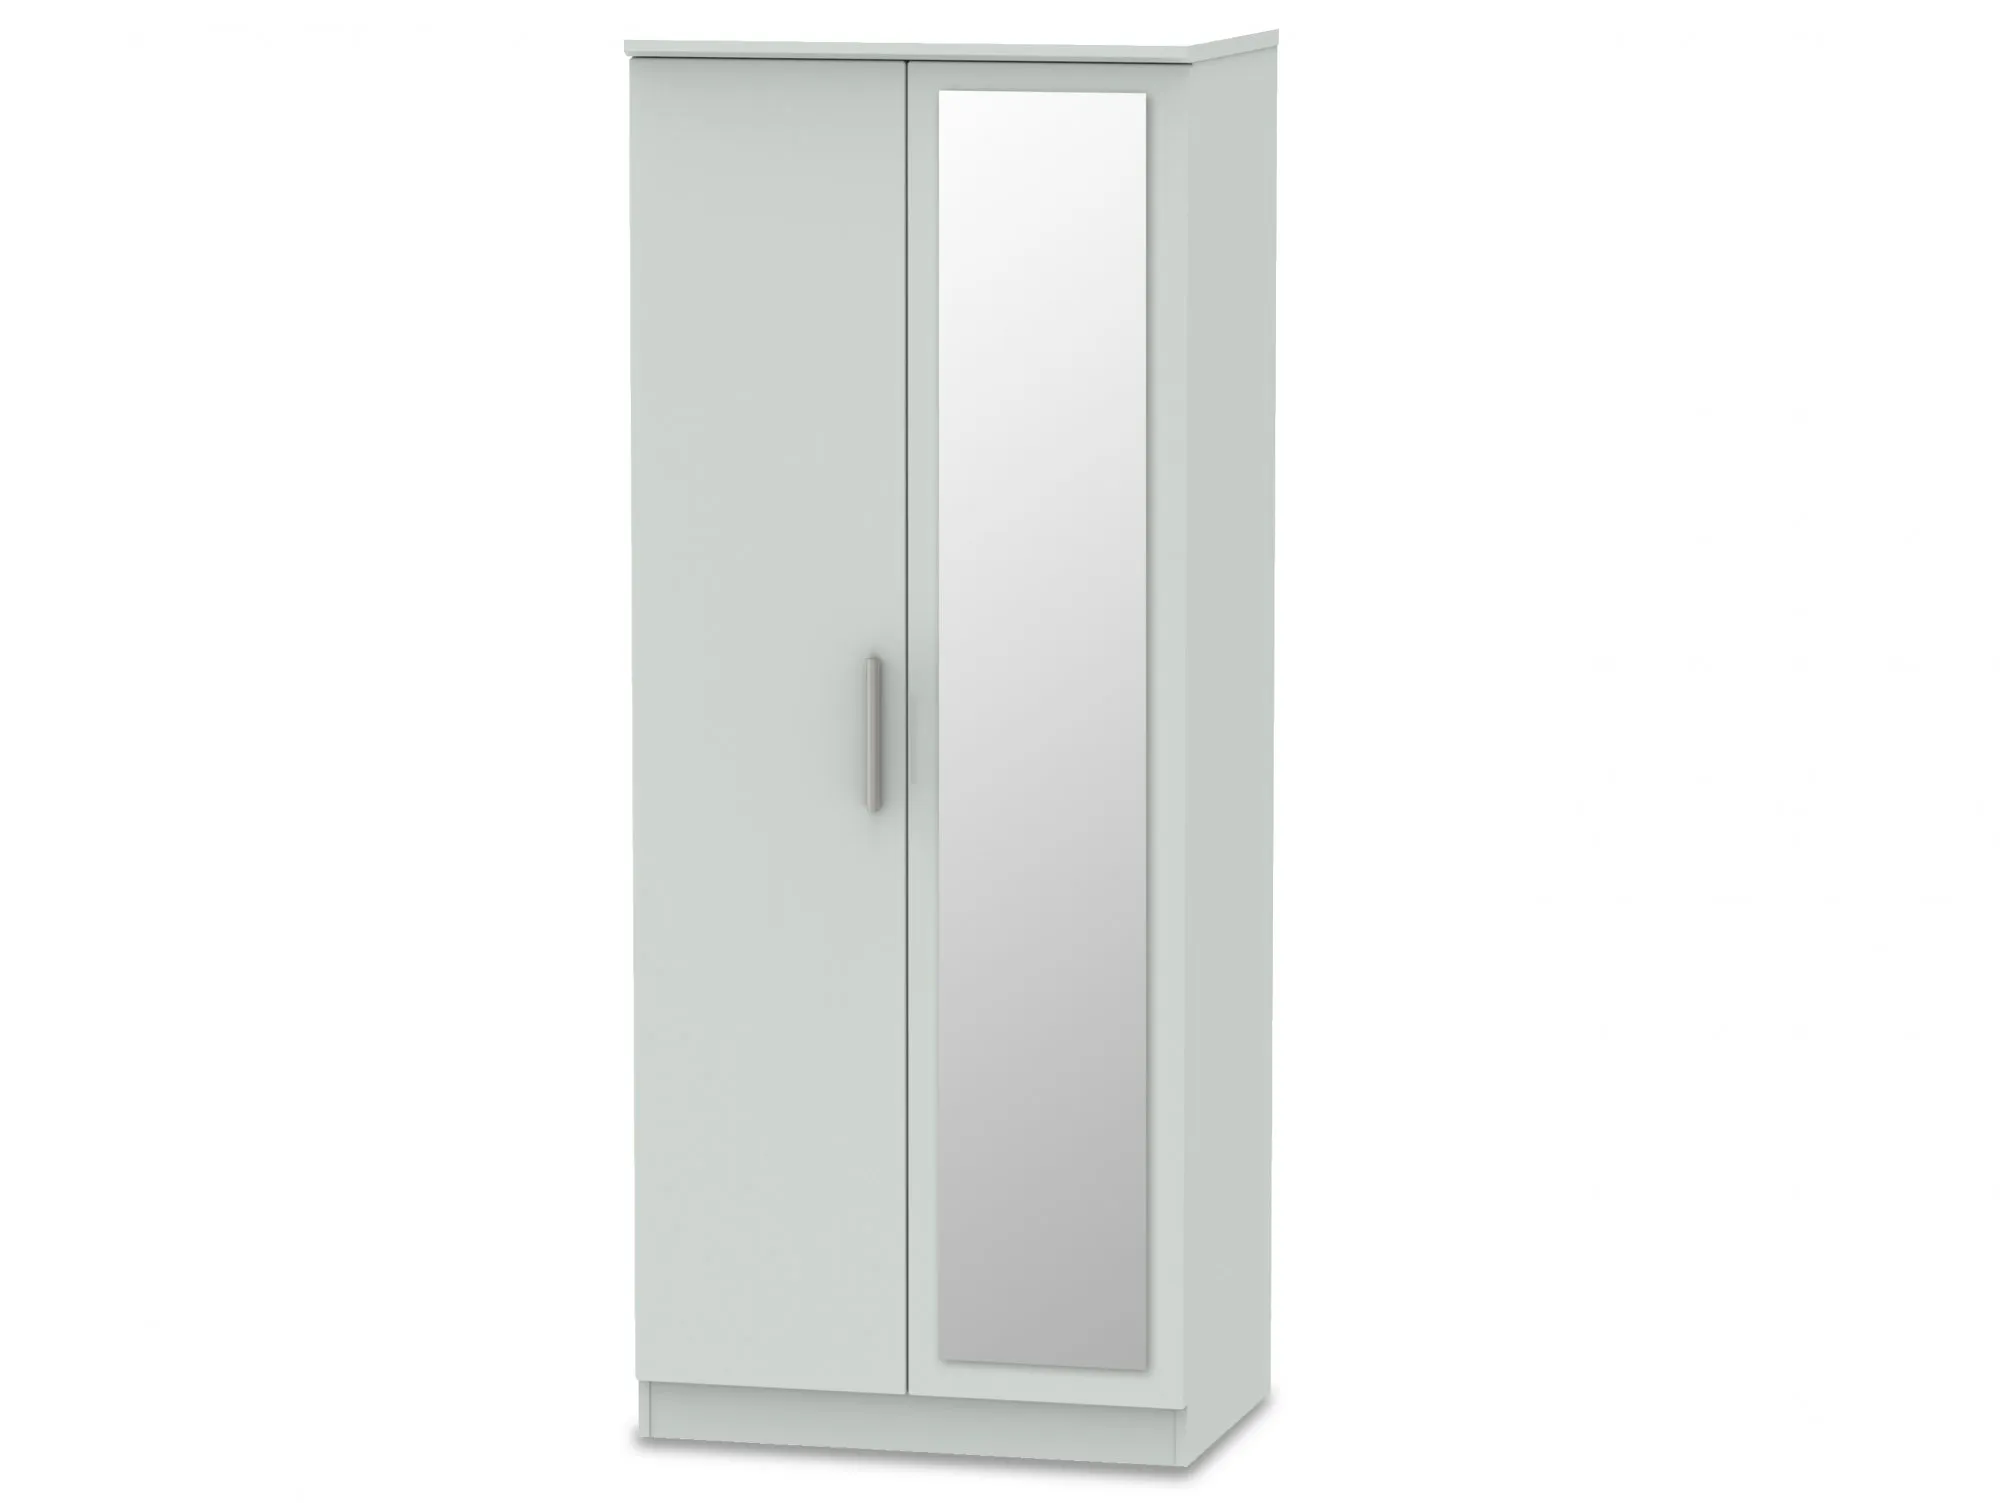 Welcome Welcome 2ft6 Knightsbridge Grey 2 Door Tall Mirrored Double Wardrobe (Assembled)